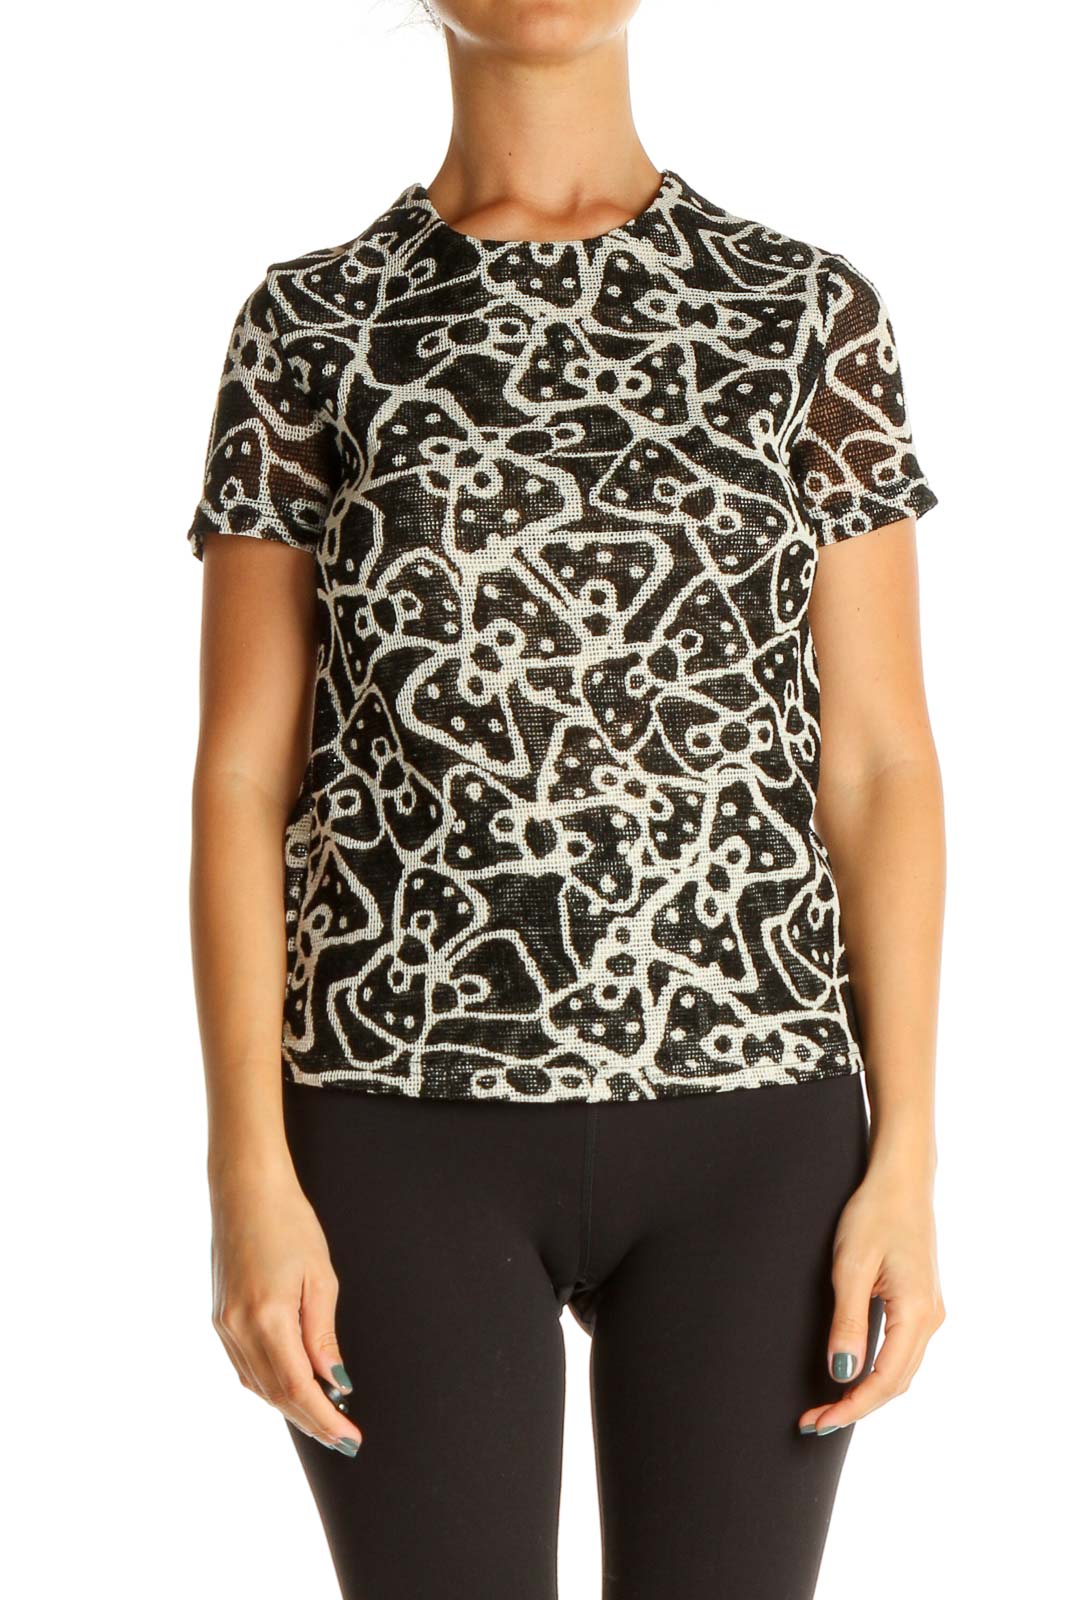 Black Graphic Print All Day Wear T-Shirt Front